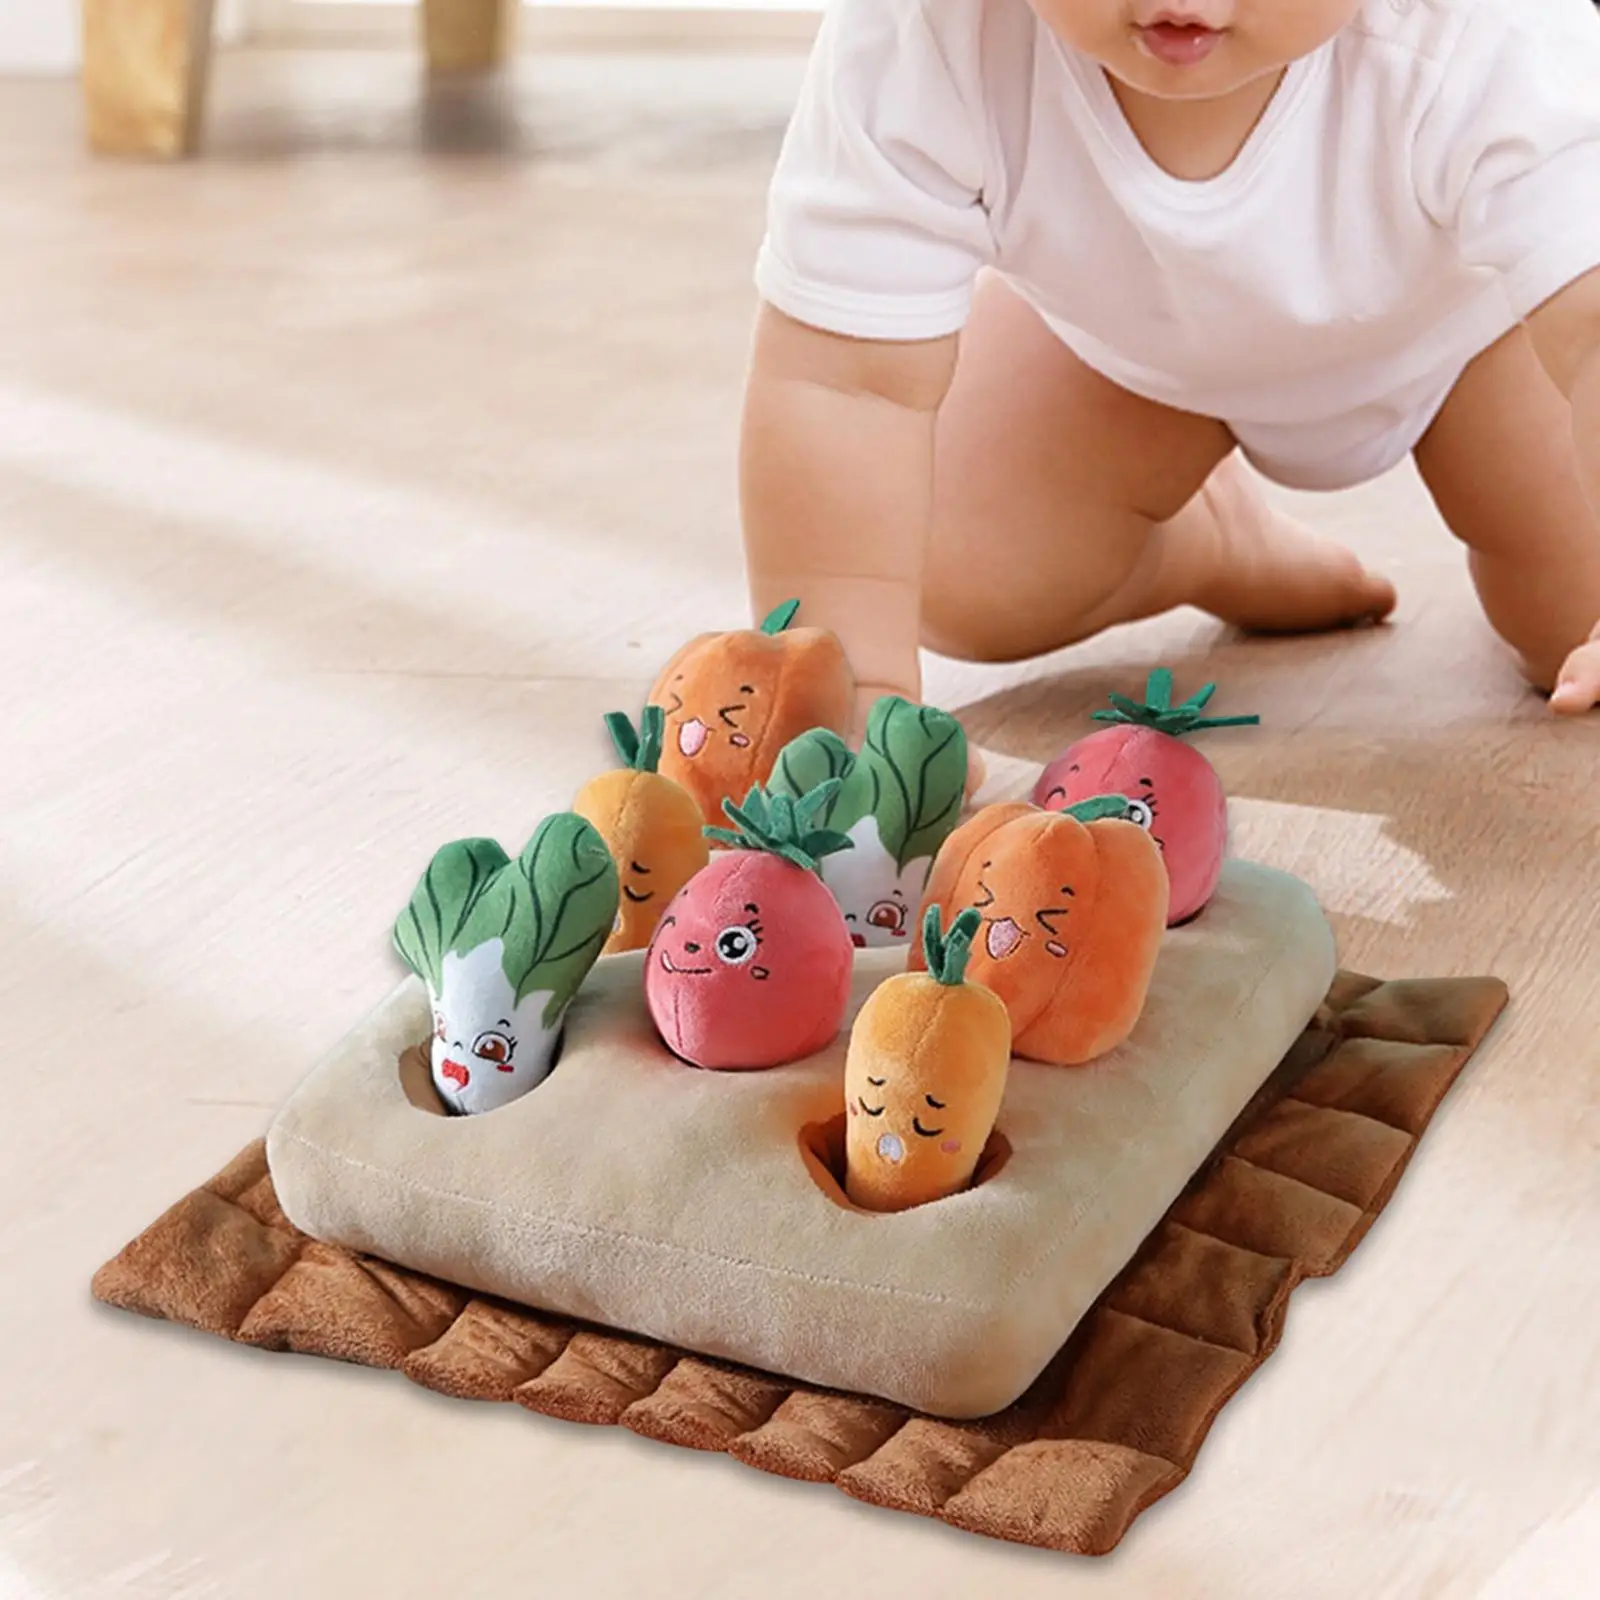 Toddlers Montessori Toys Vegetable Plush Toy for Toddlers Age 1-3 Accessory